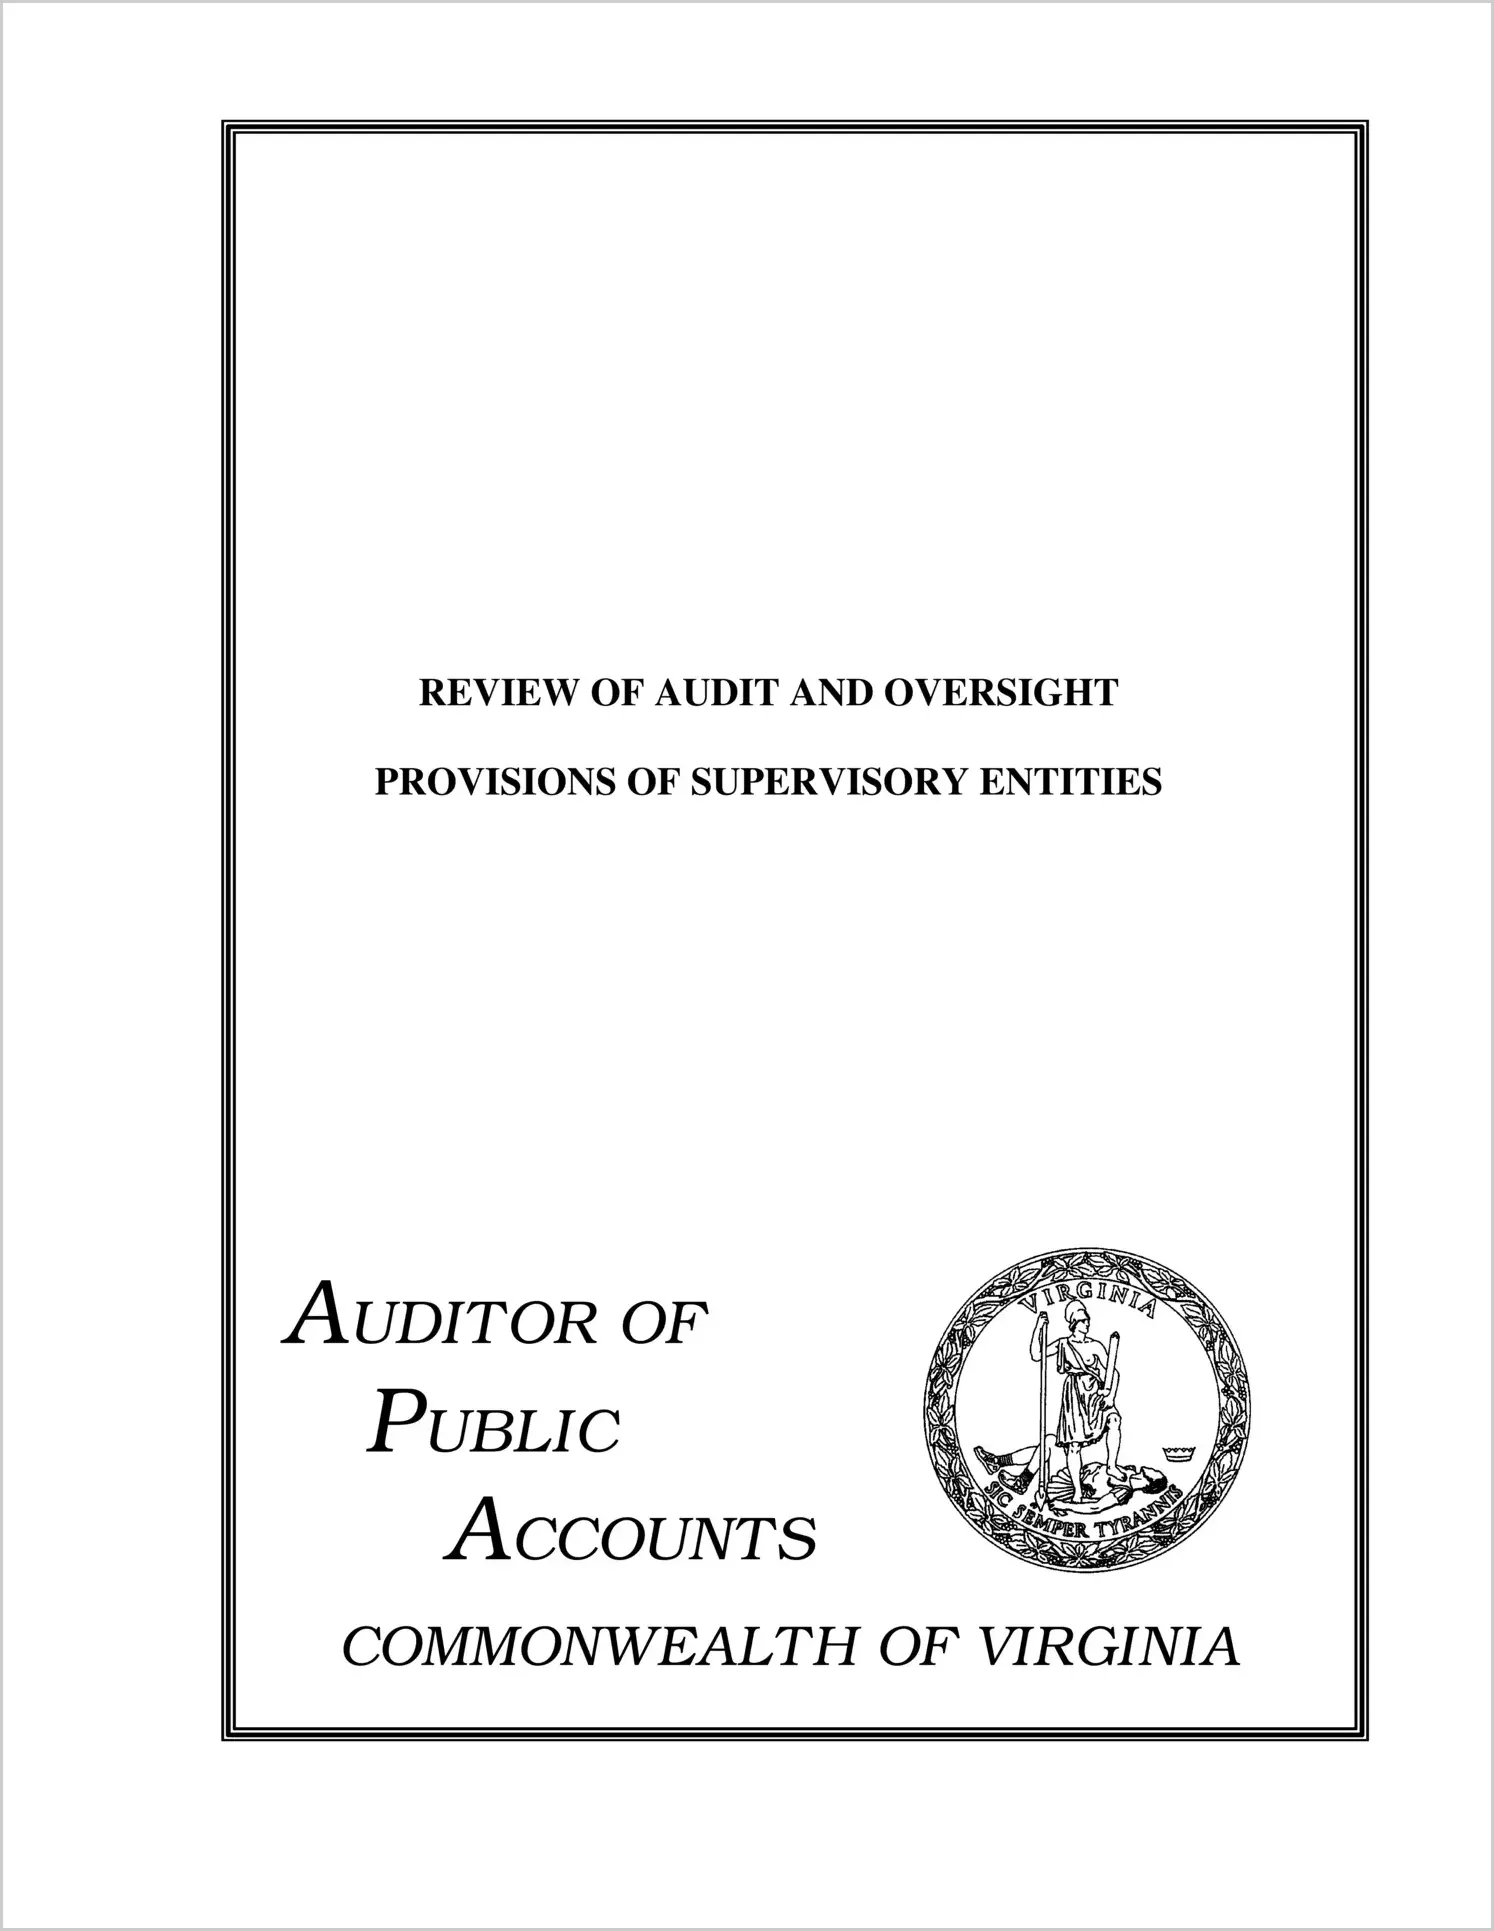 Special ReportReview of Audit and Oversight Provisions of Supervisory Entities(Report Date: 11/2/1999)